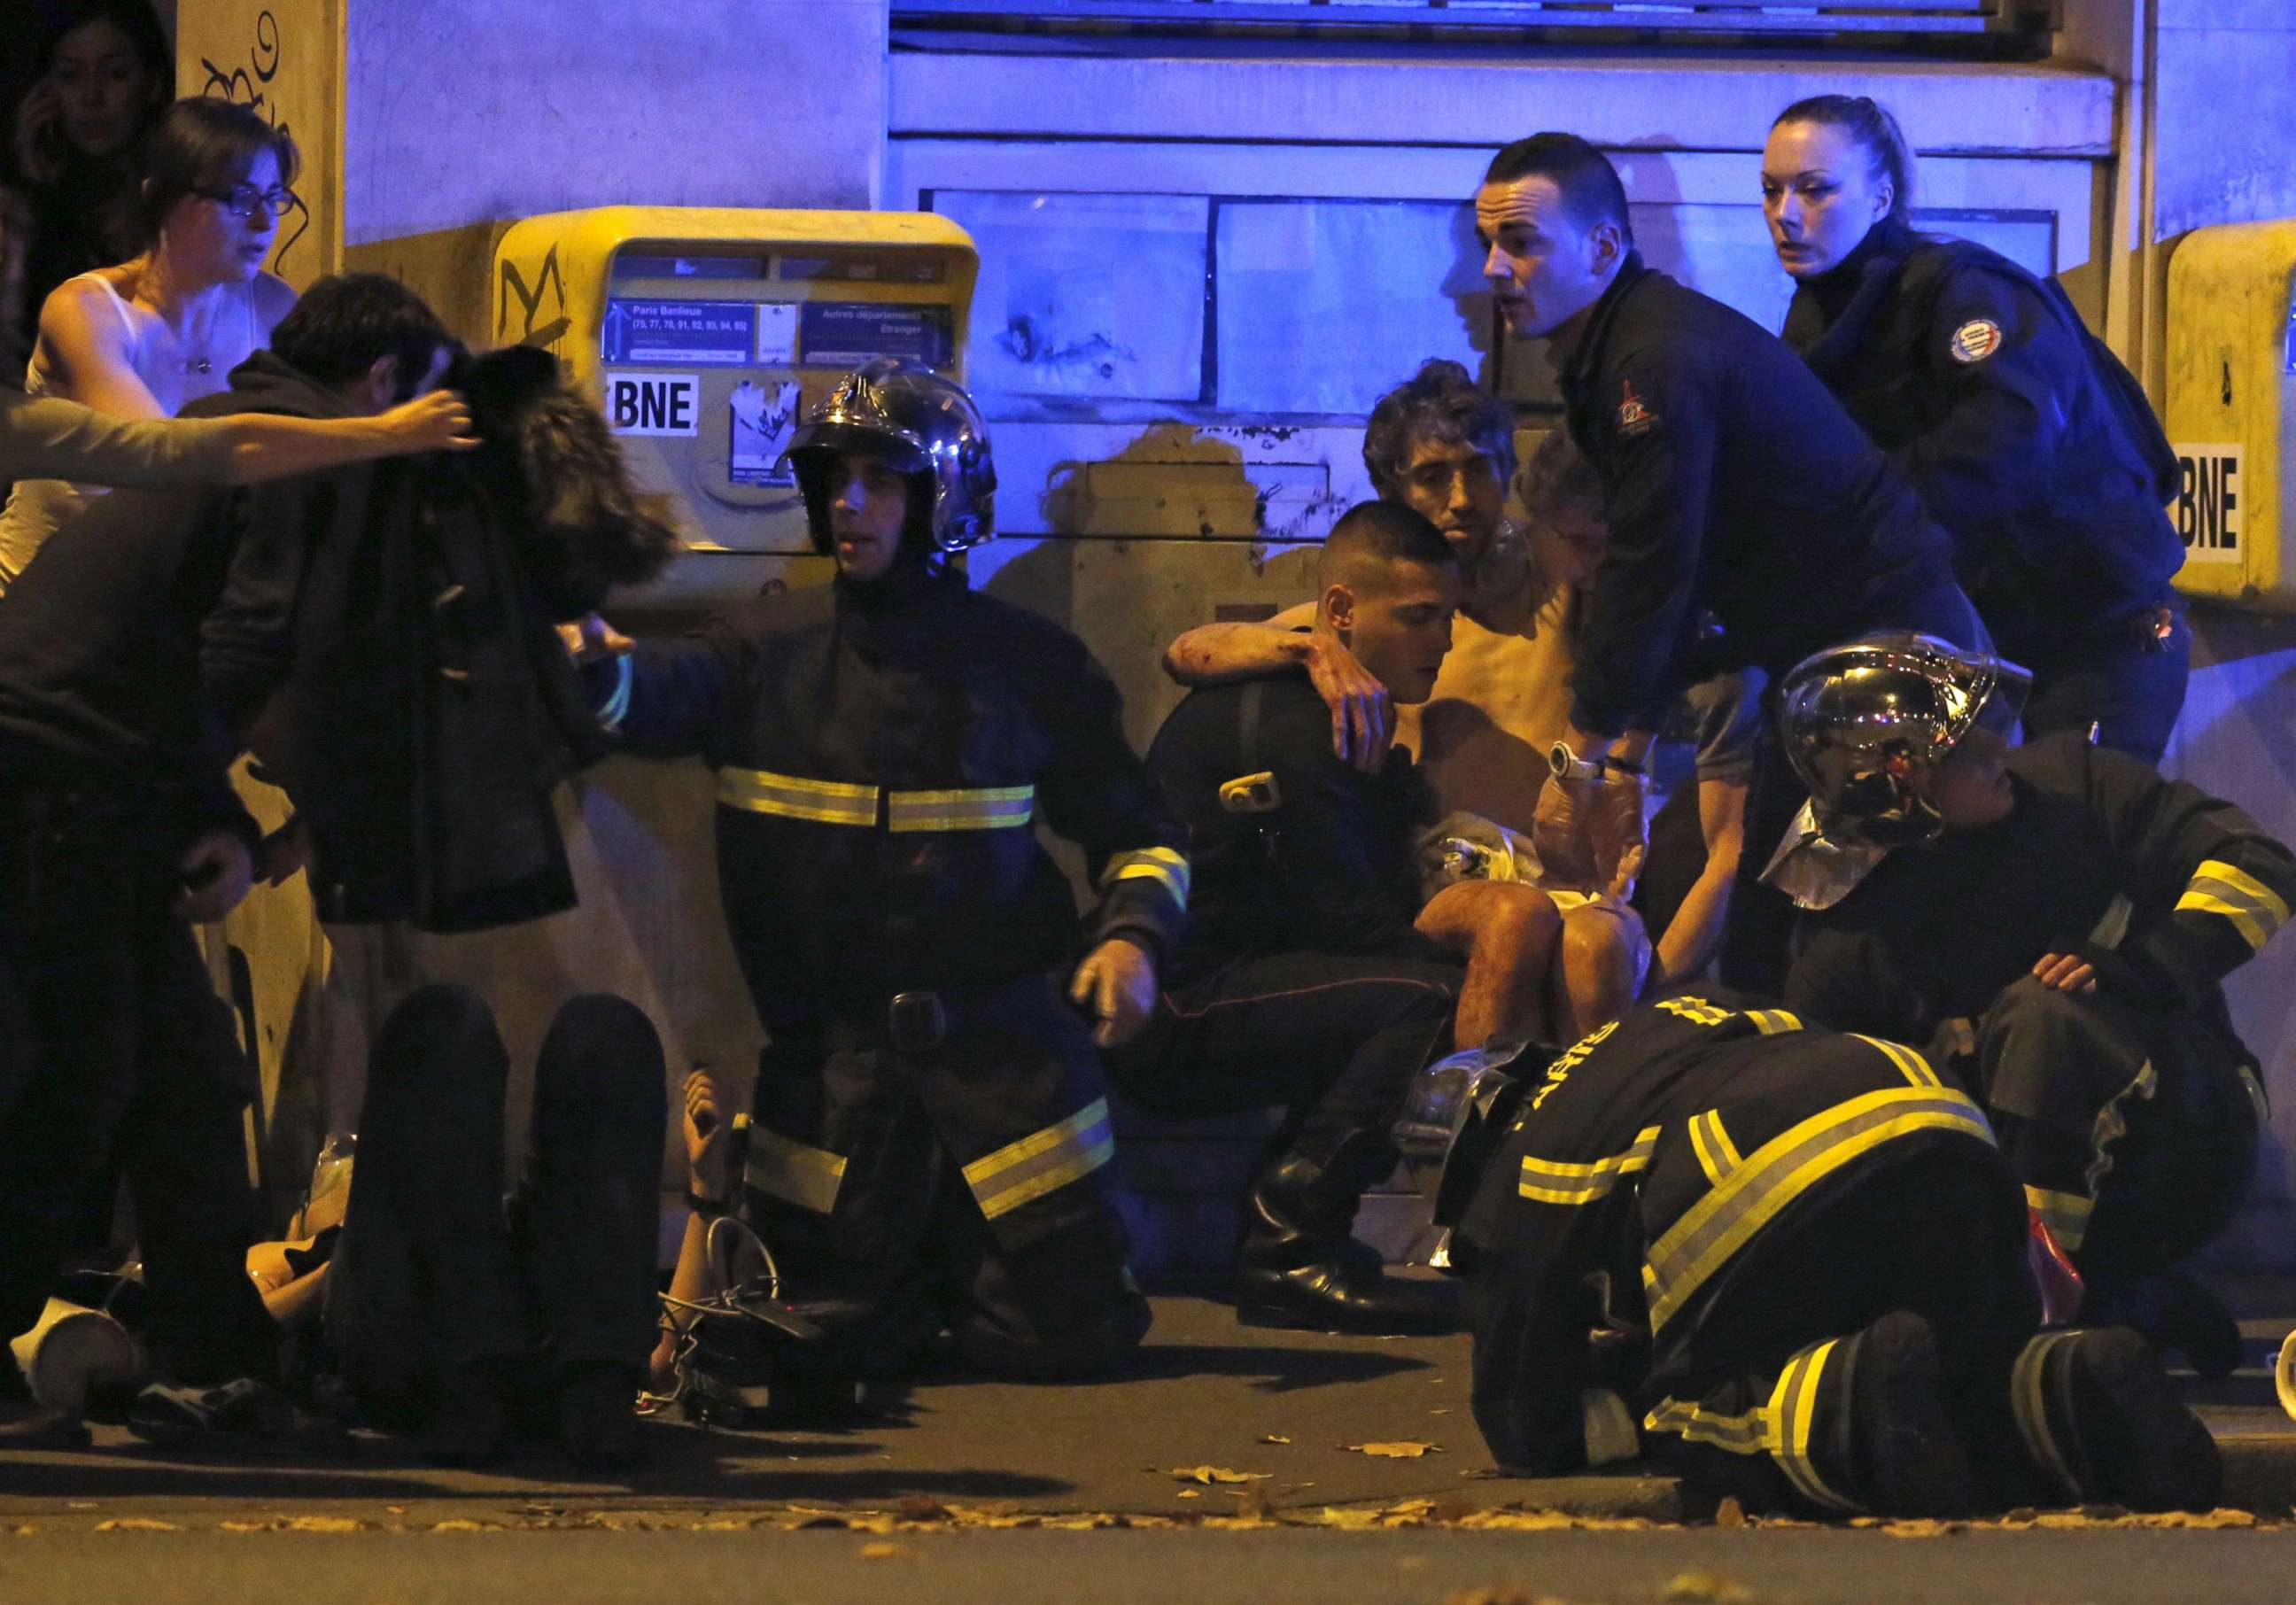 PHOTO: French fire brigade members aid an injured individual near the Bataclan concert hall following fatal shootings in Paris, Nov. 13, 2015.